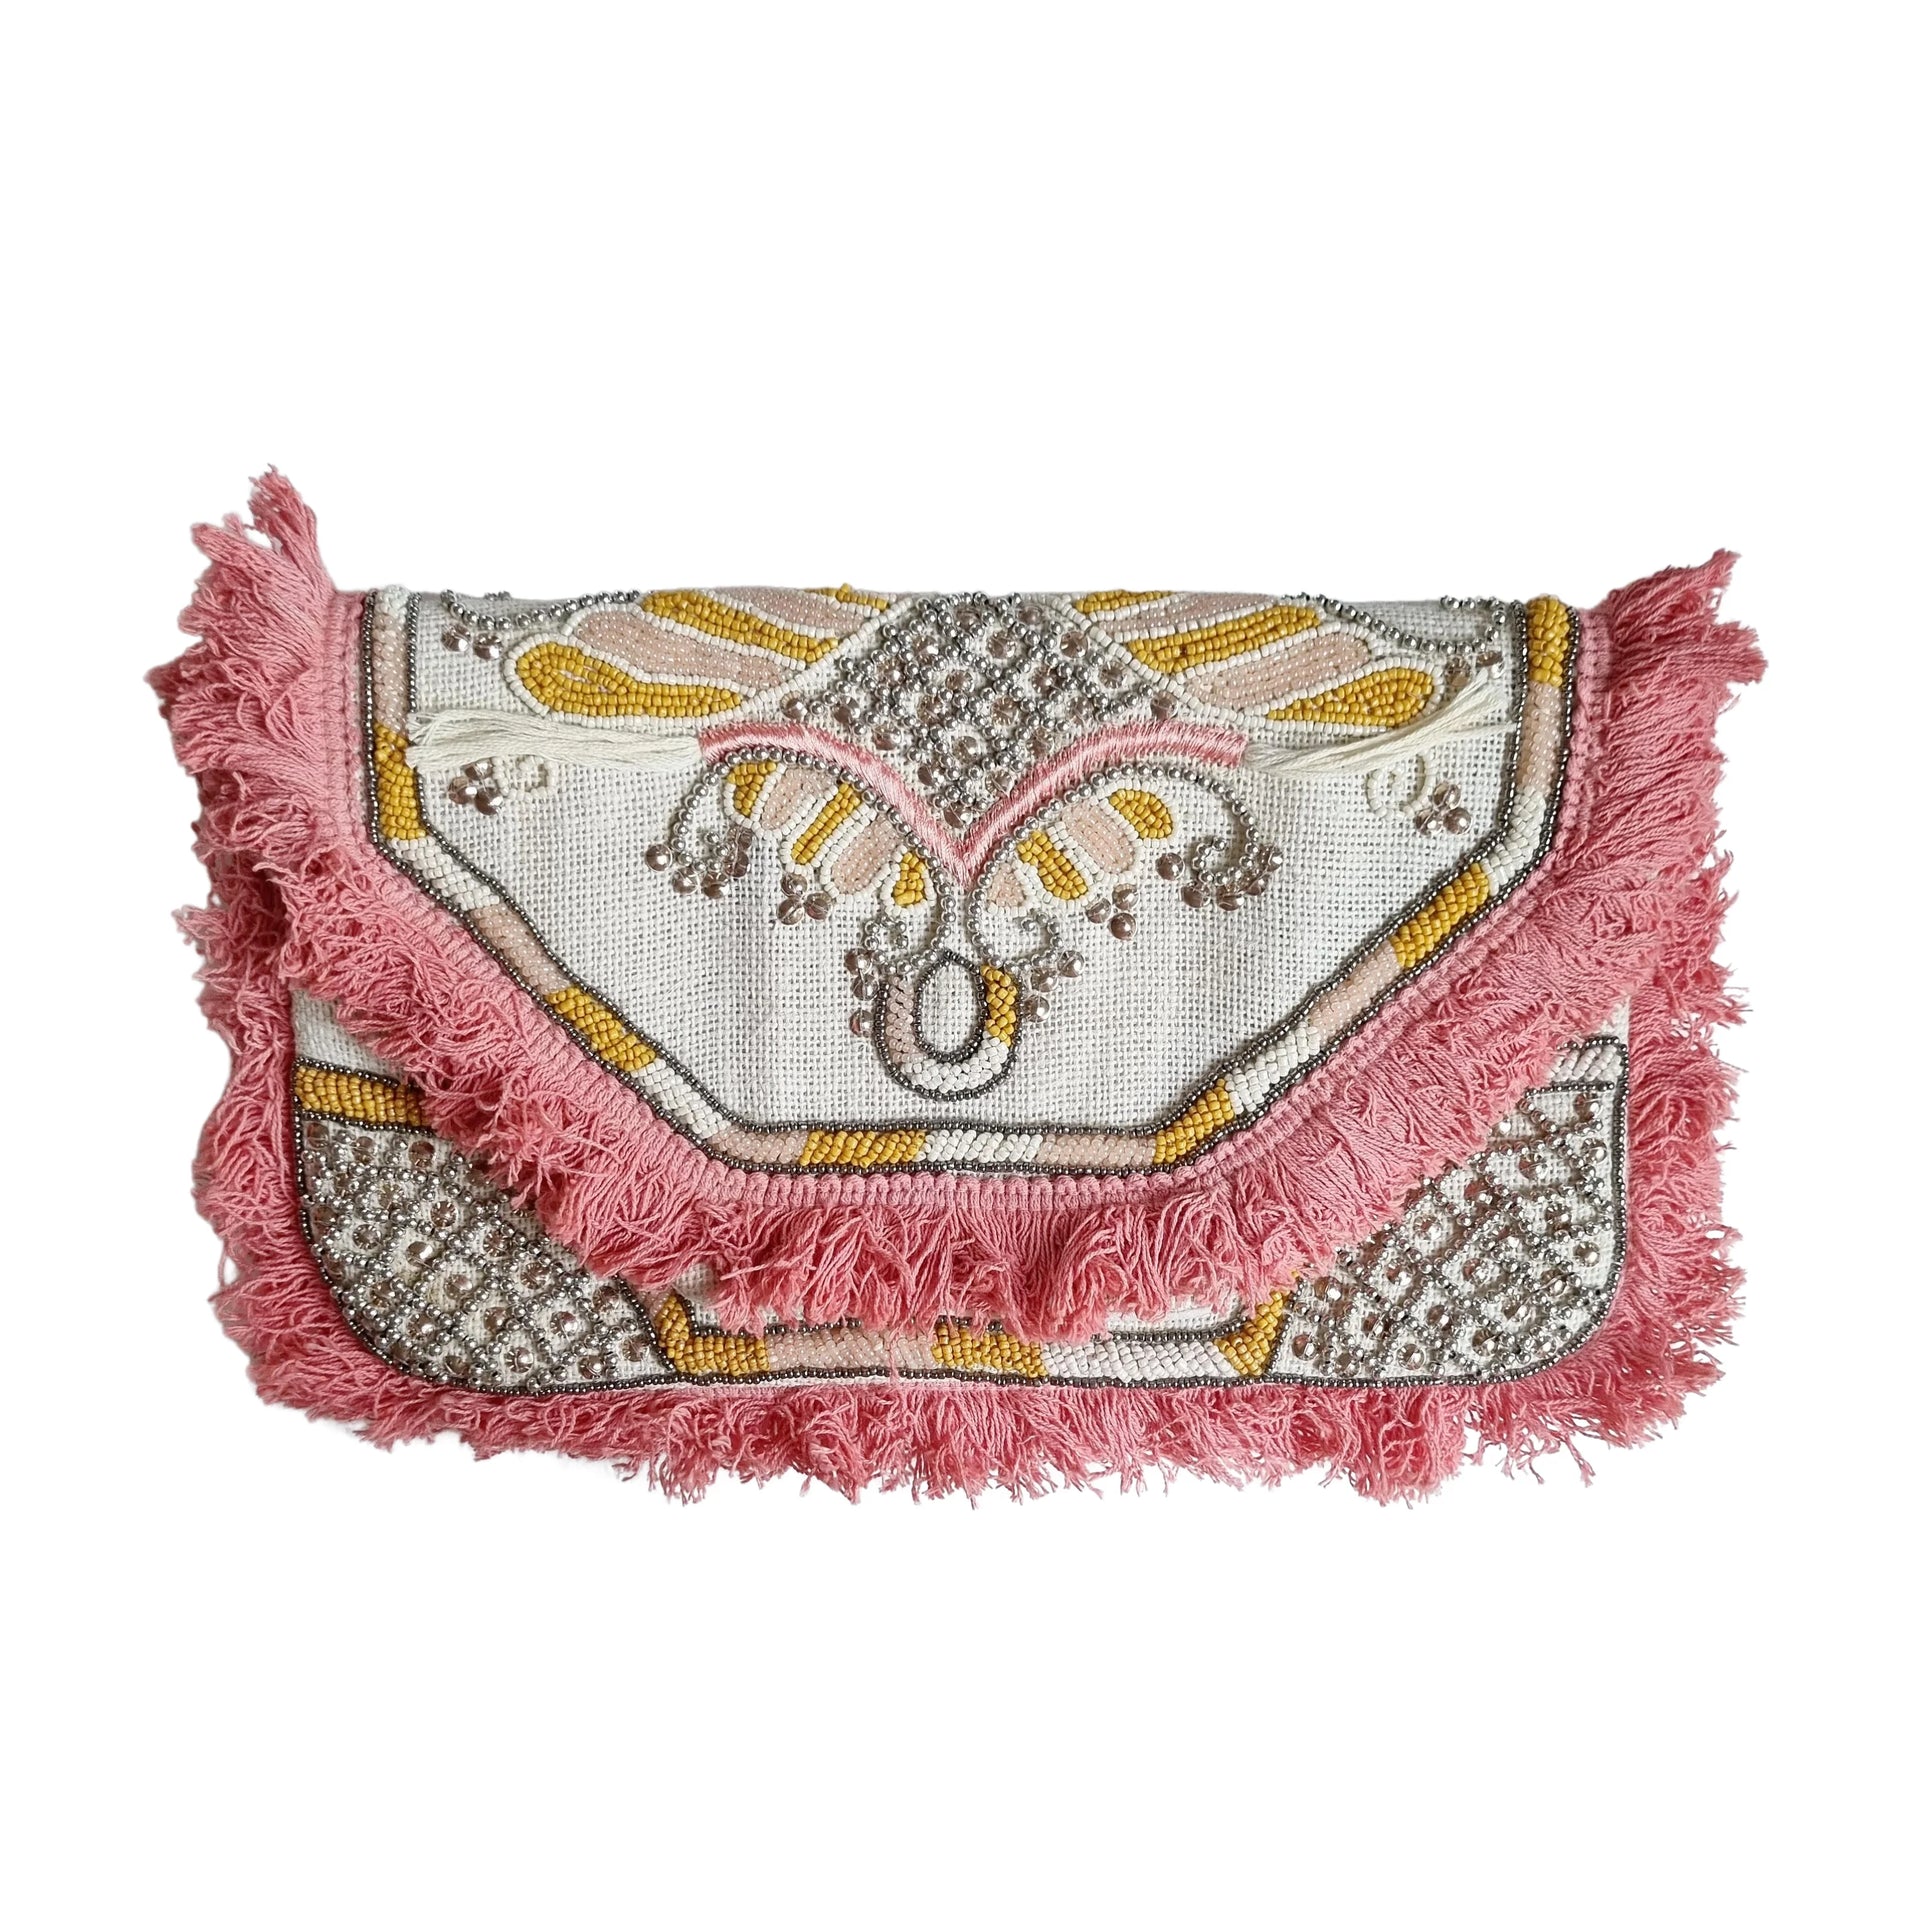 Woven Beaded Flap Over Statement Boho Clutch Featuring Beaded and Fringing Detail